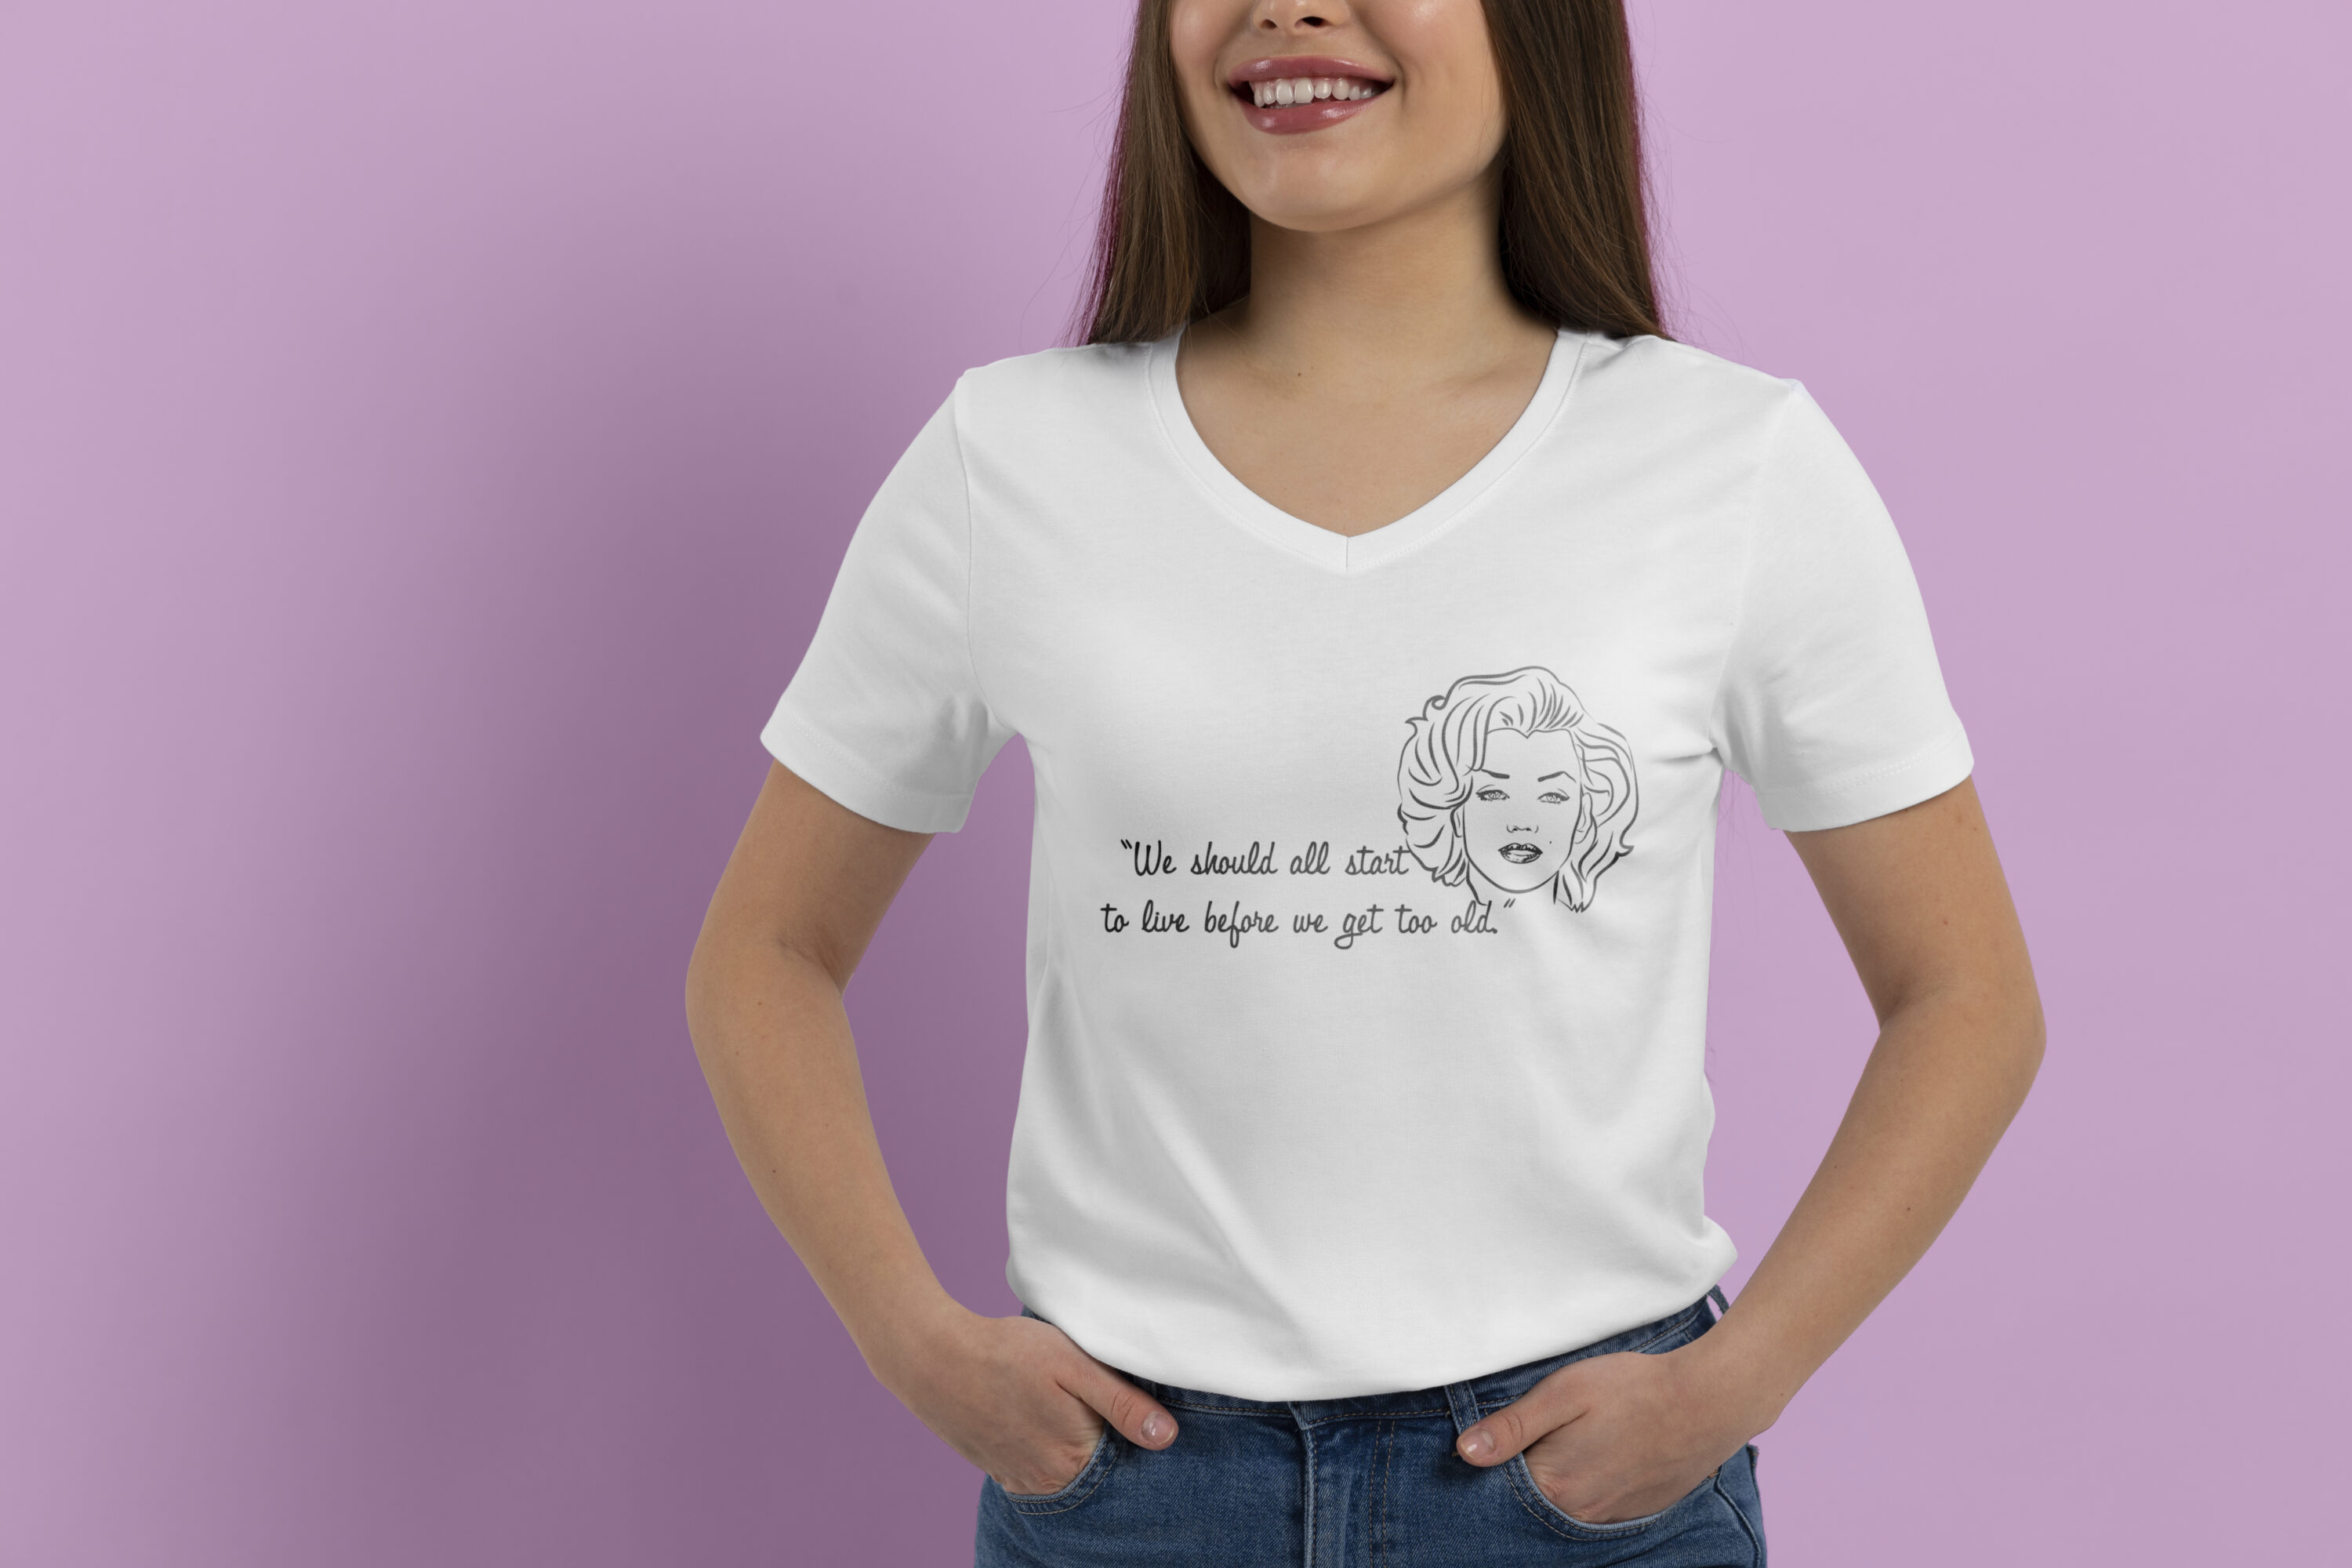 Images of a white t-shirt with a beautiful print of a quote by Marilyn Monroe.